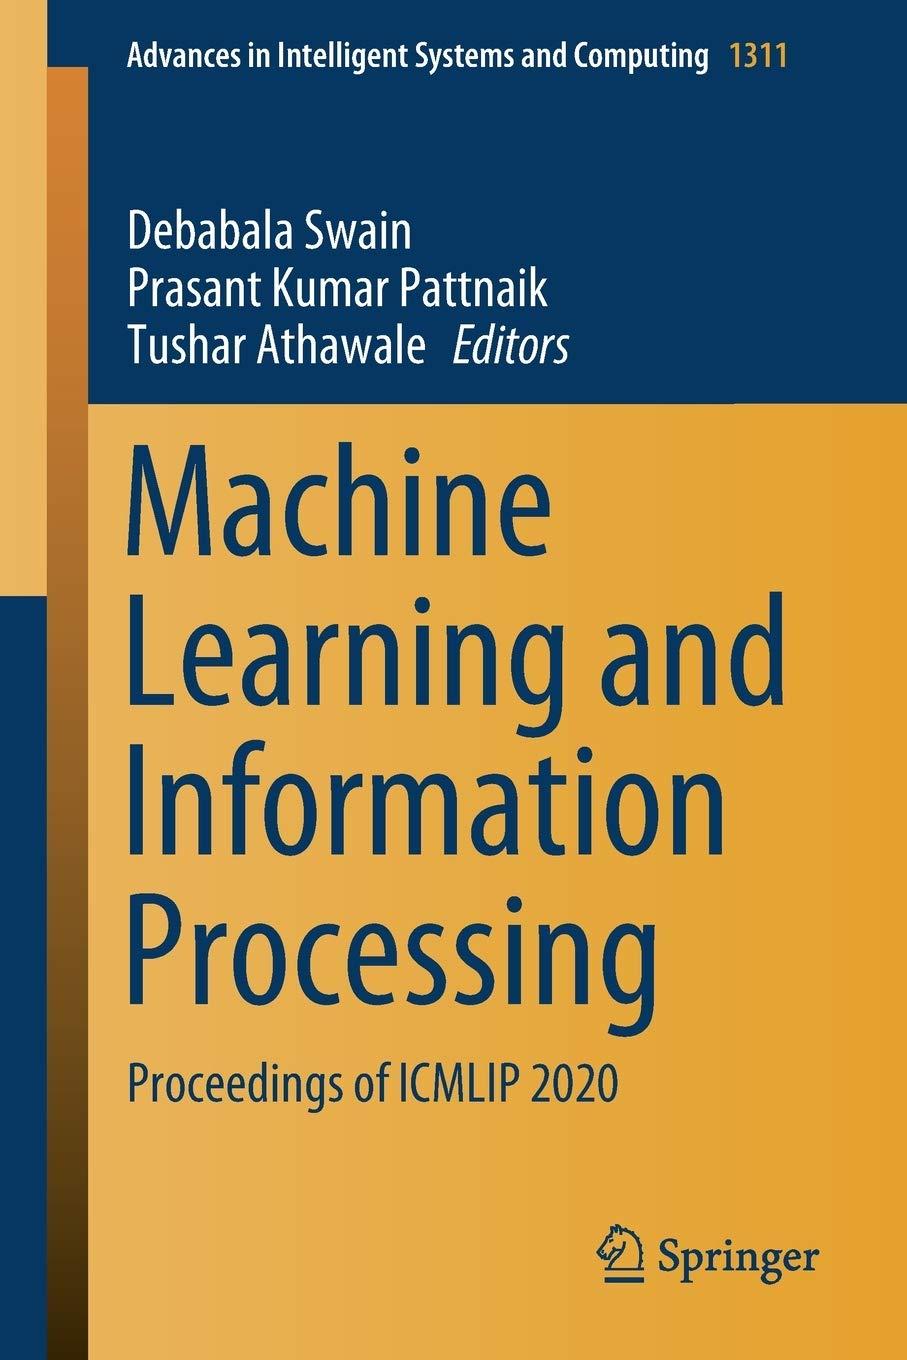 machine learning and information processing proceedings of icmlip 2020 1st edition debabala swain , prasant